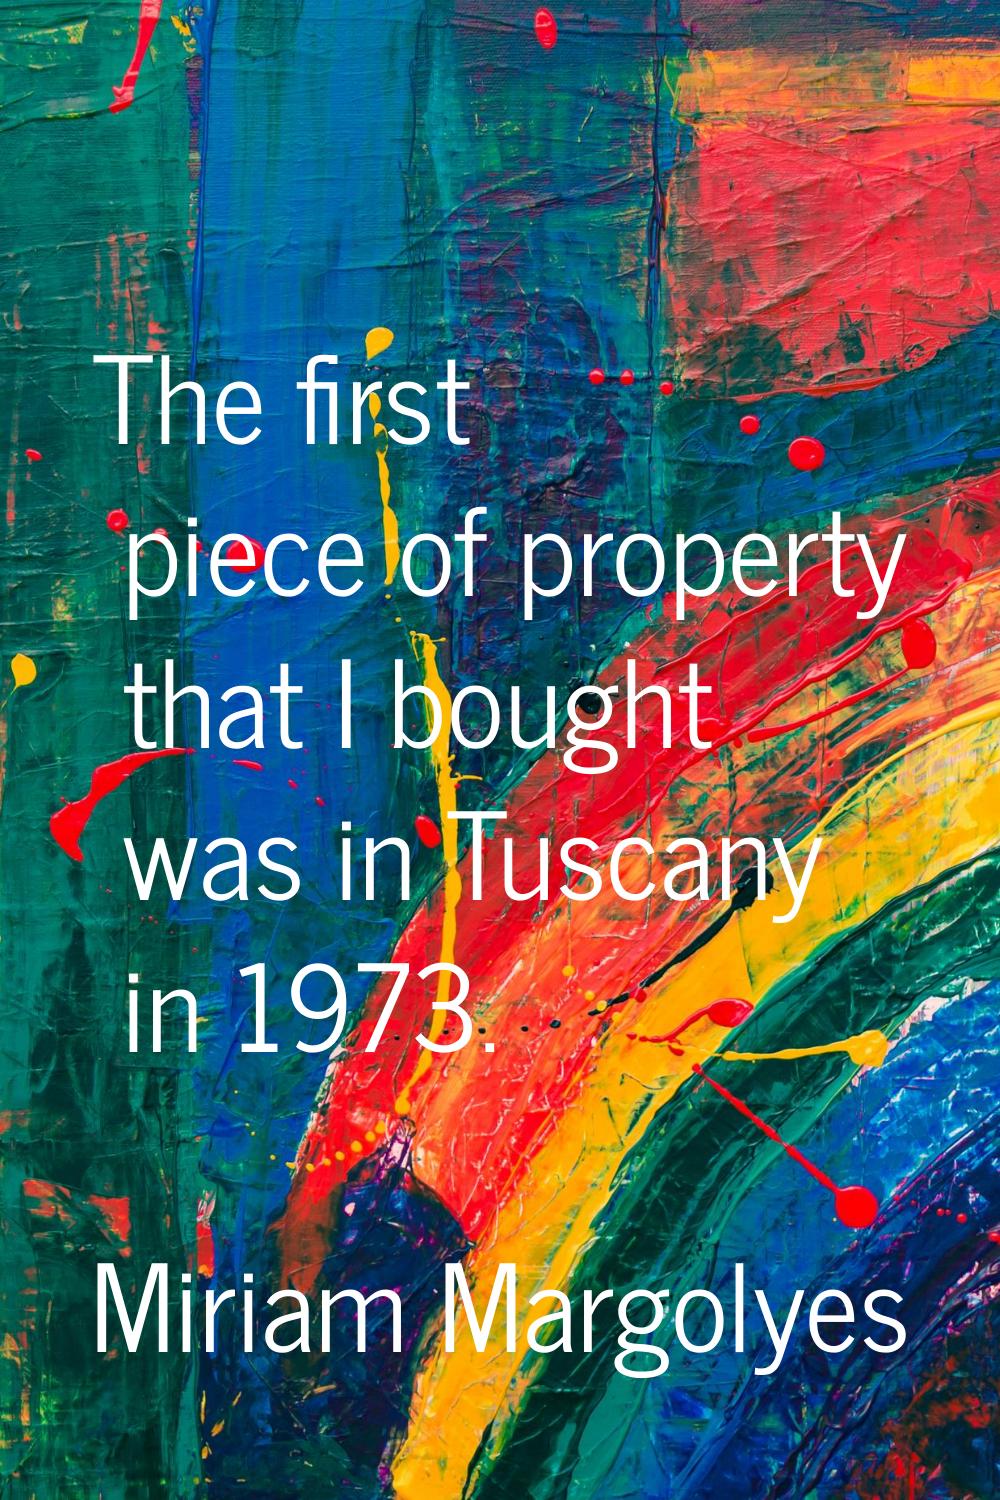 The first piece of property that I bought was in Tuscany in 1973.